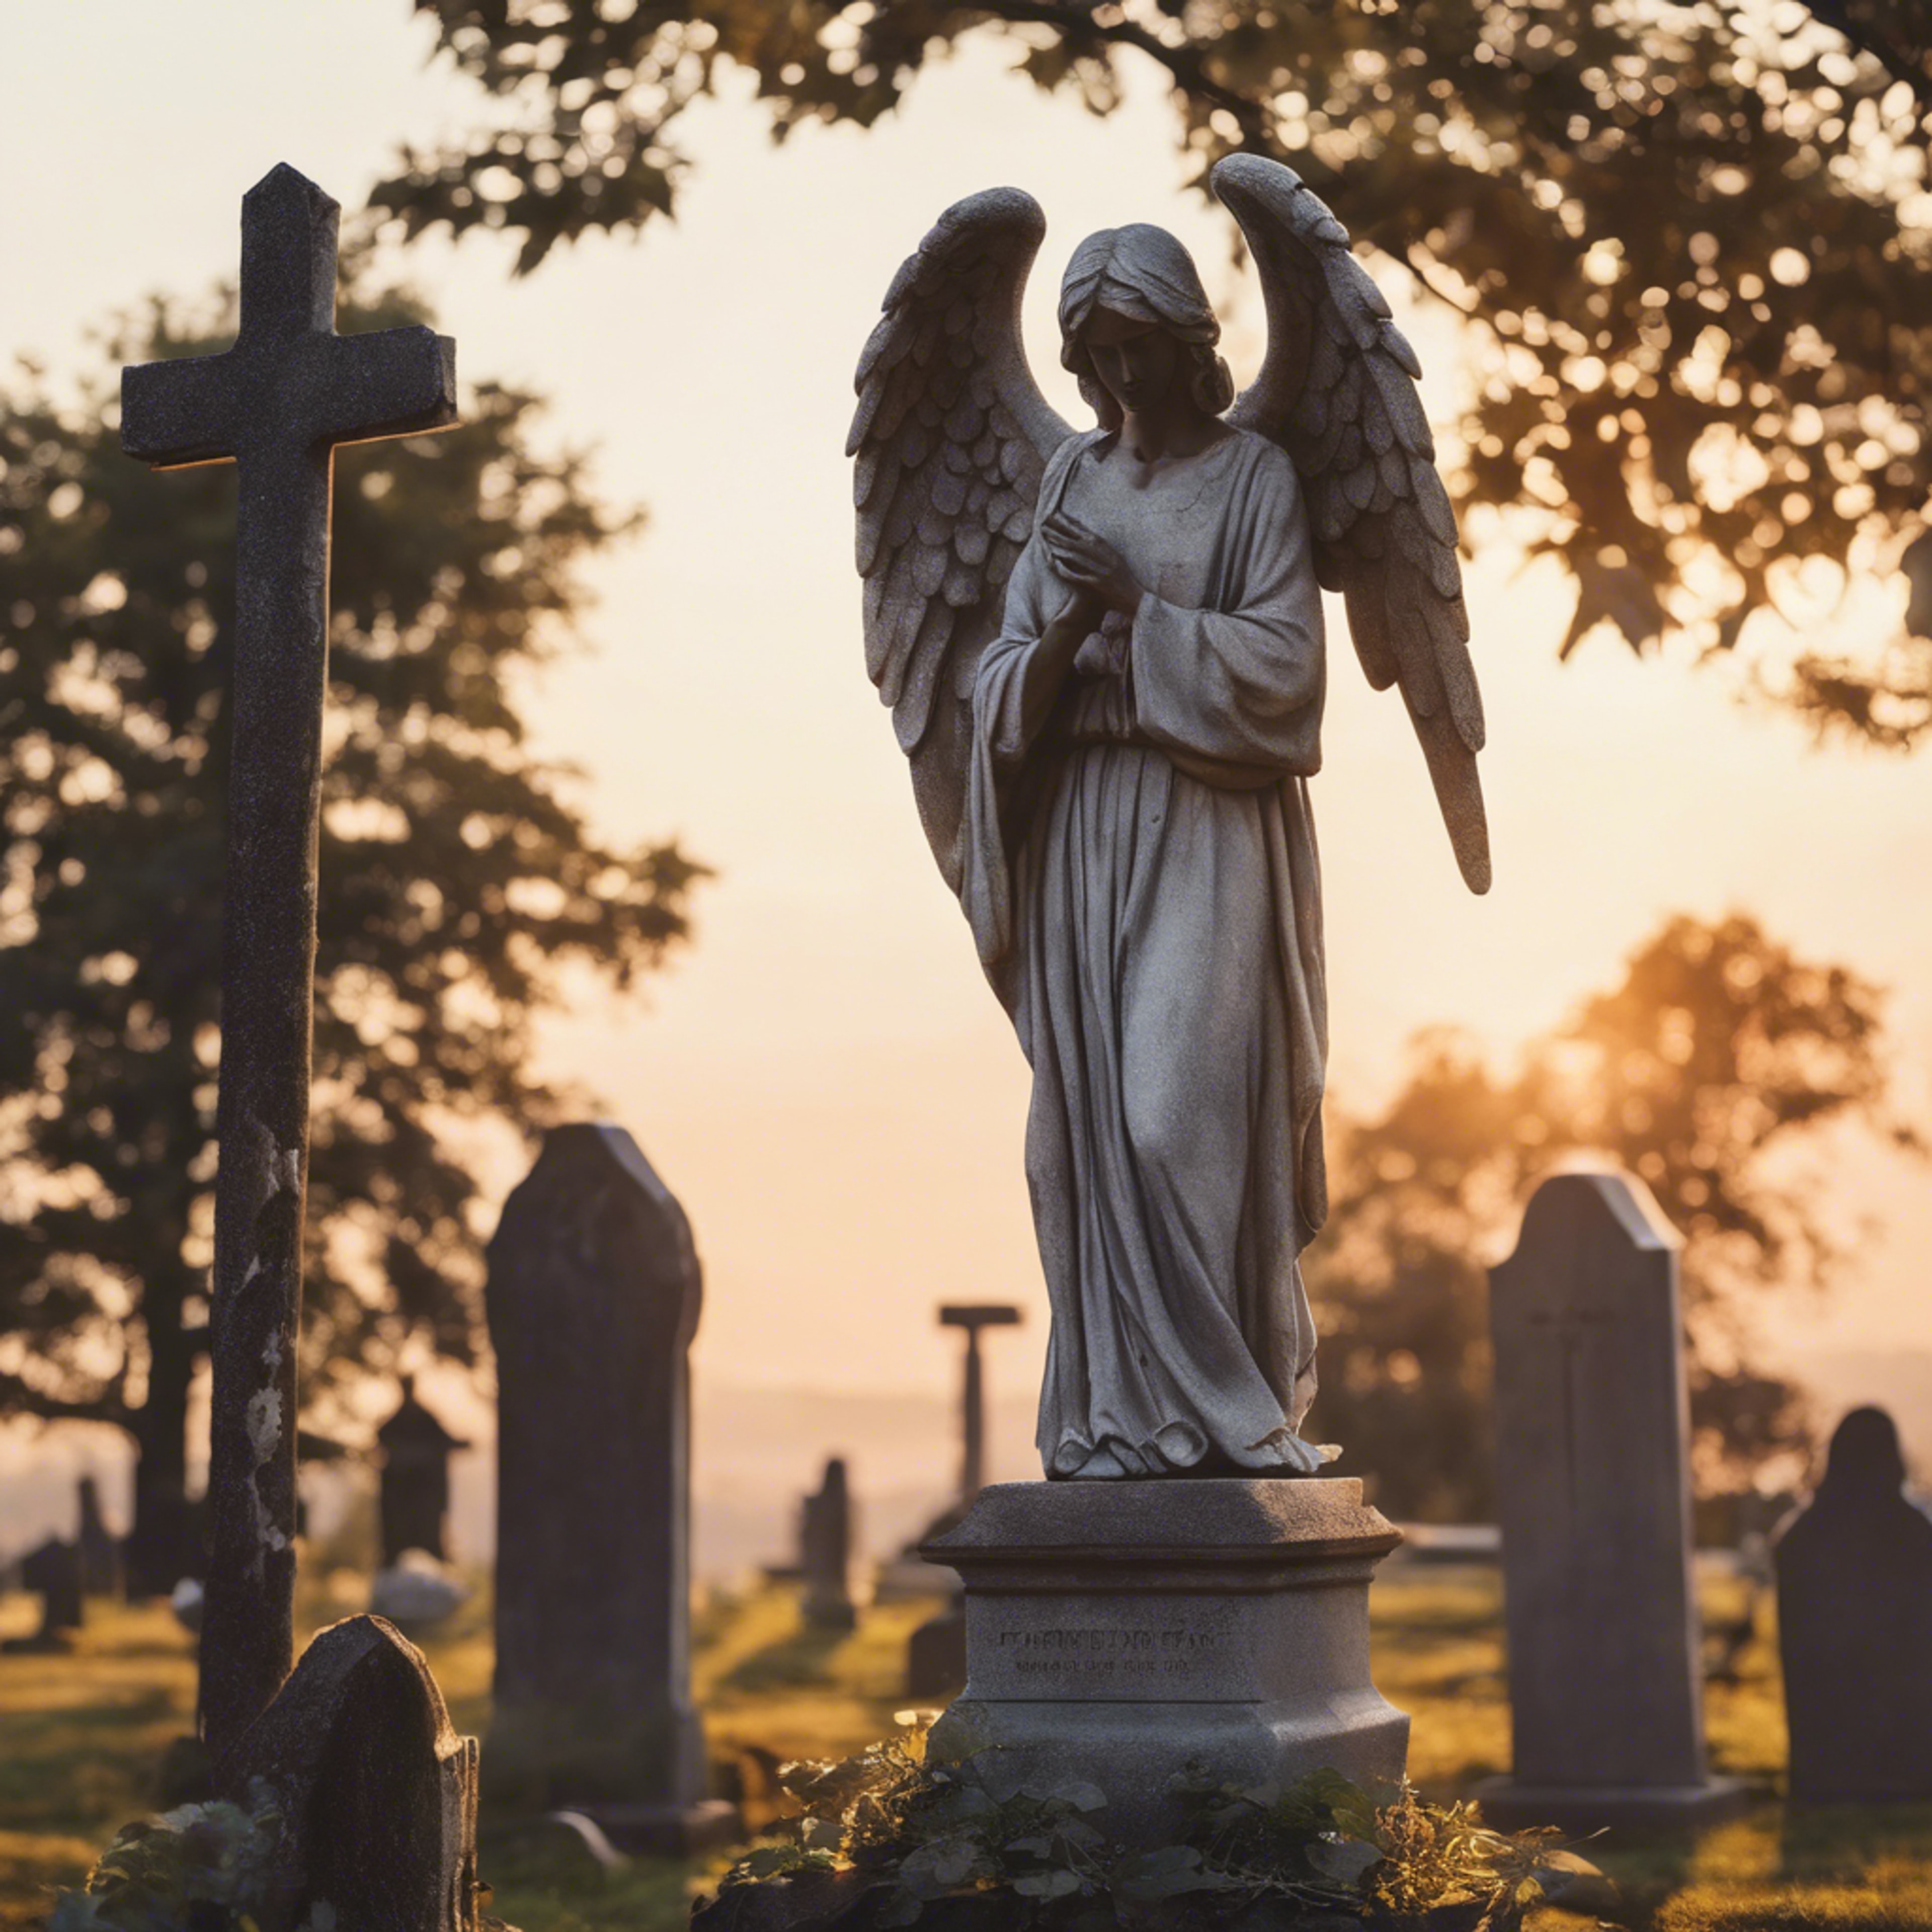 A peaceful graveyard scene with a stone angel statue guarding over the resting place under a serene sunset. 牆紙[5f1d382335d645bc8b2f]